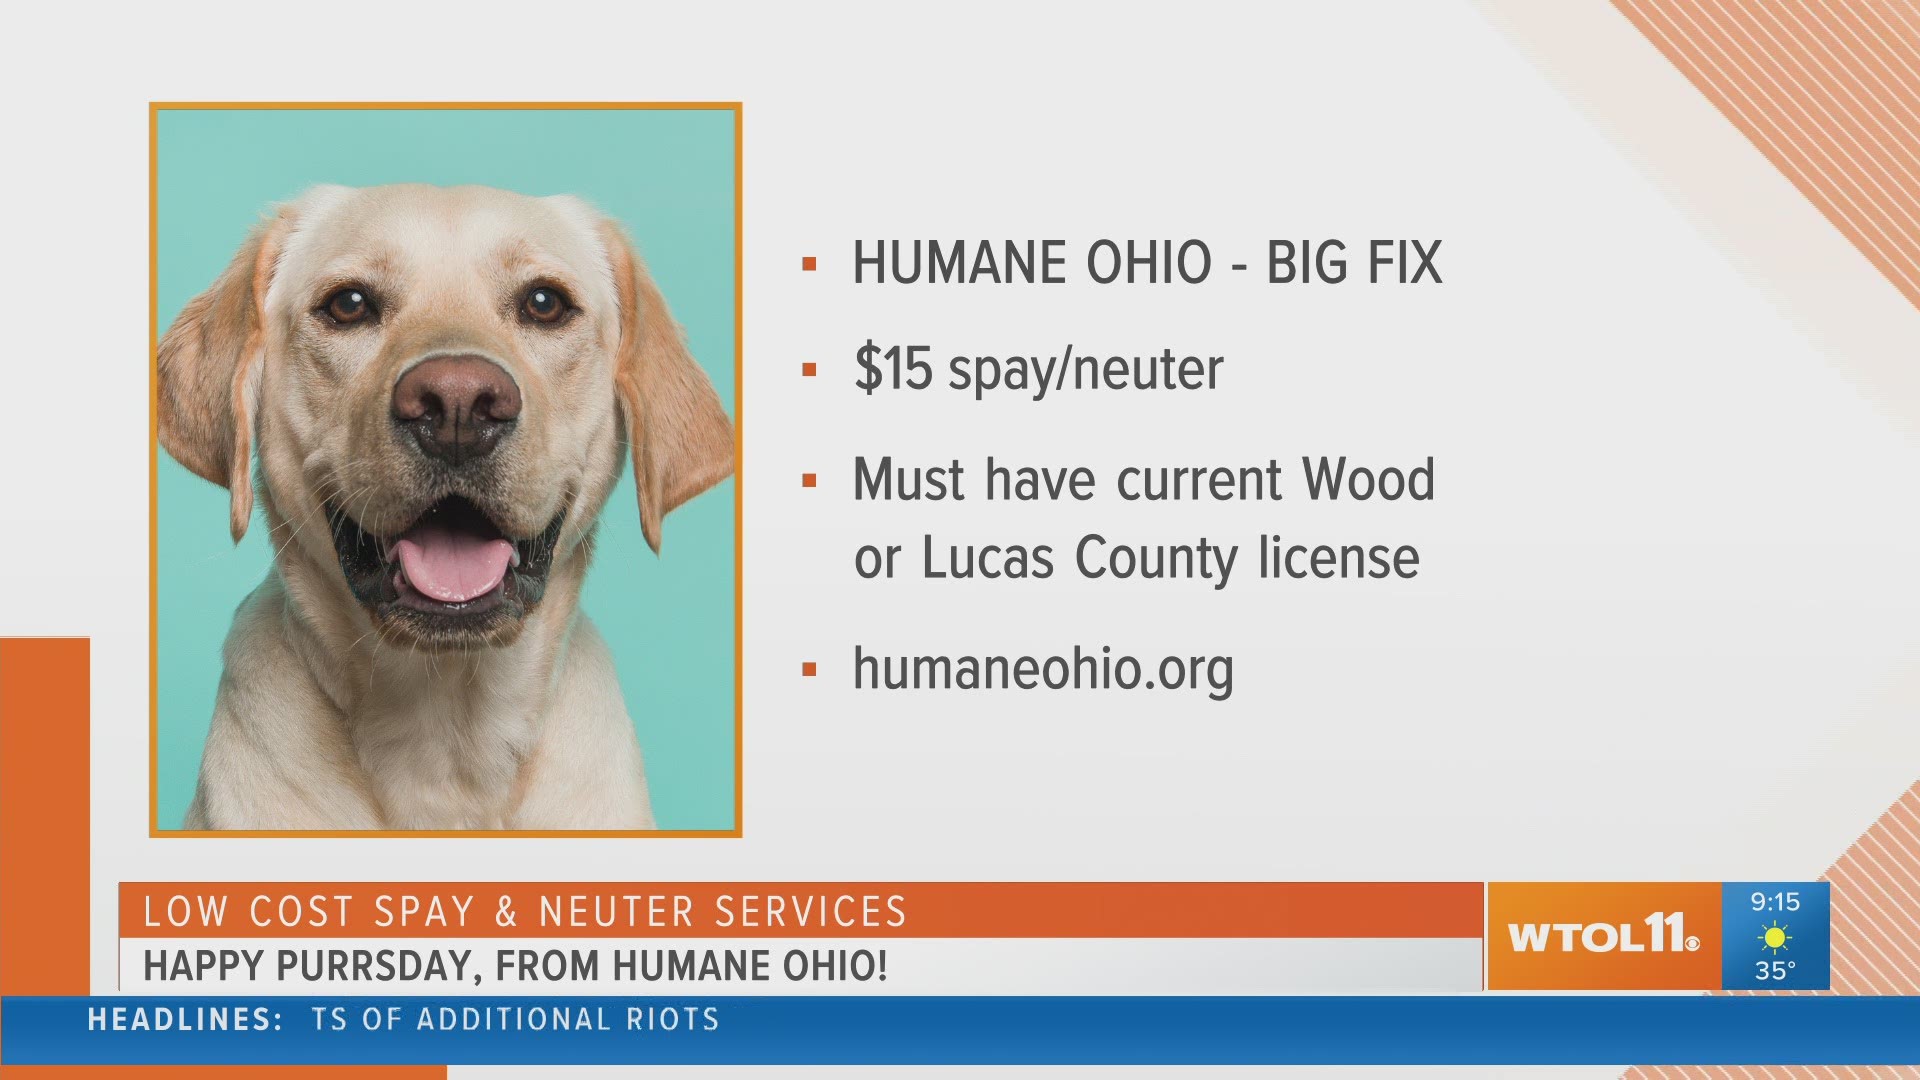 Humane Ohio's Big Fix is on, meaning you can bring your licensed dog to be spayed or neutered for $15.